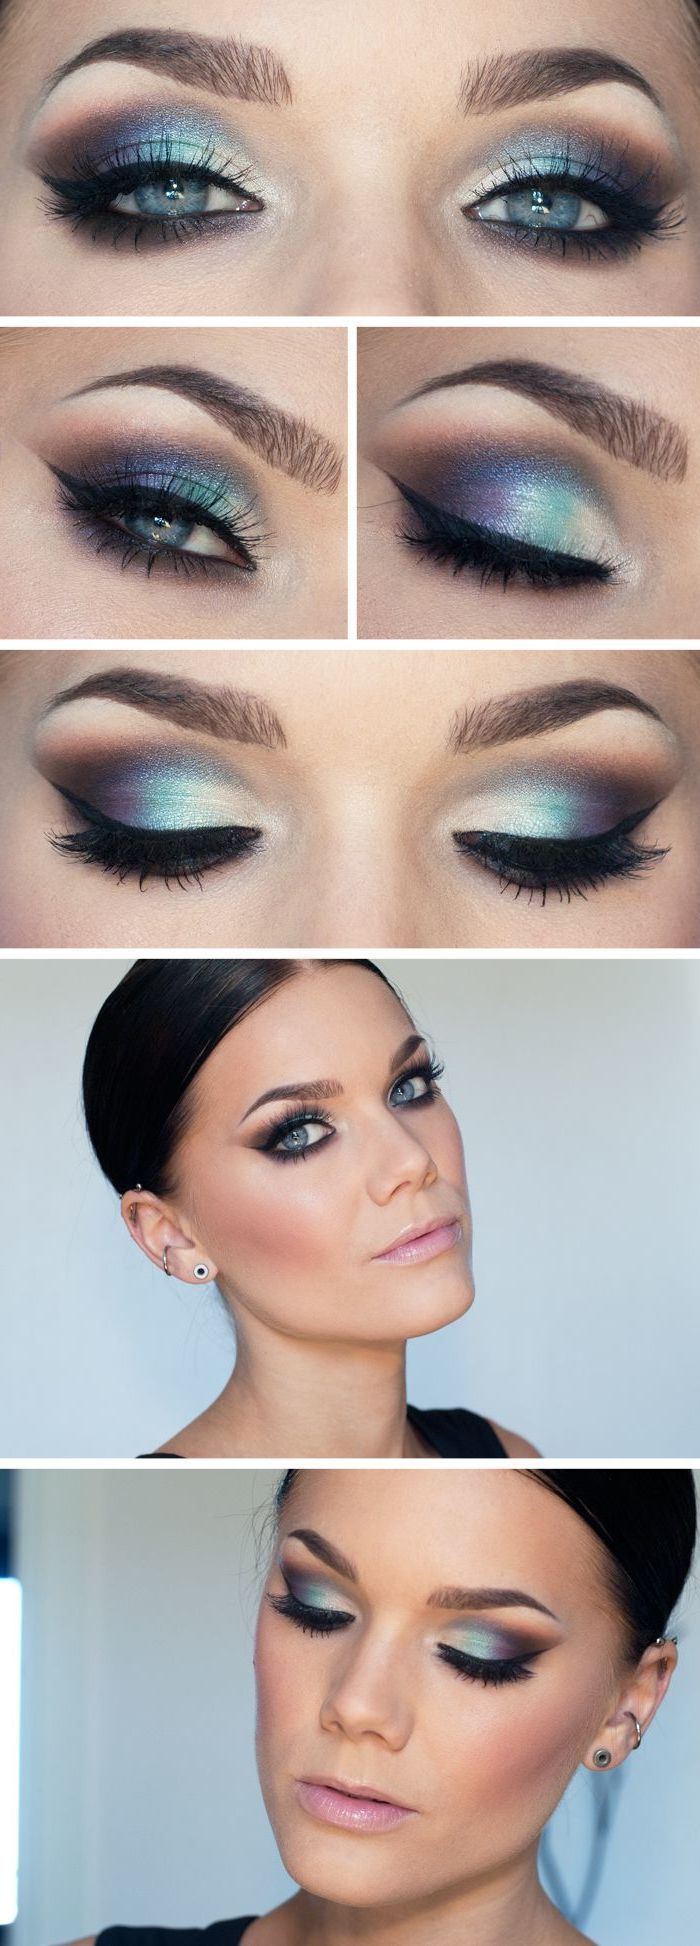 New Year’s Eve make-up: 10 tips for brown and blue eyes!